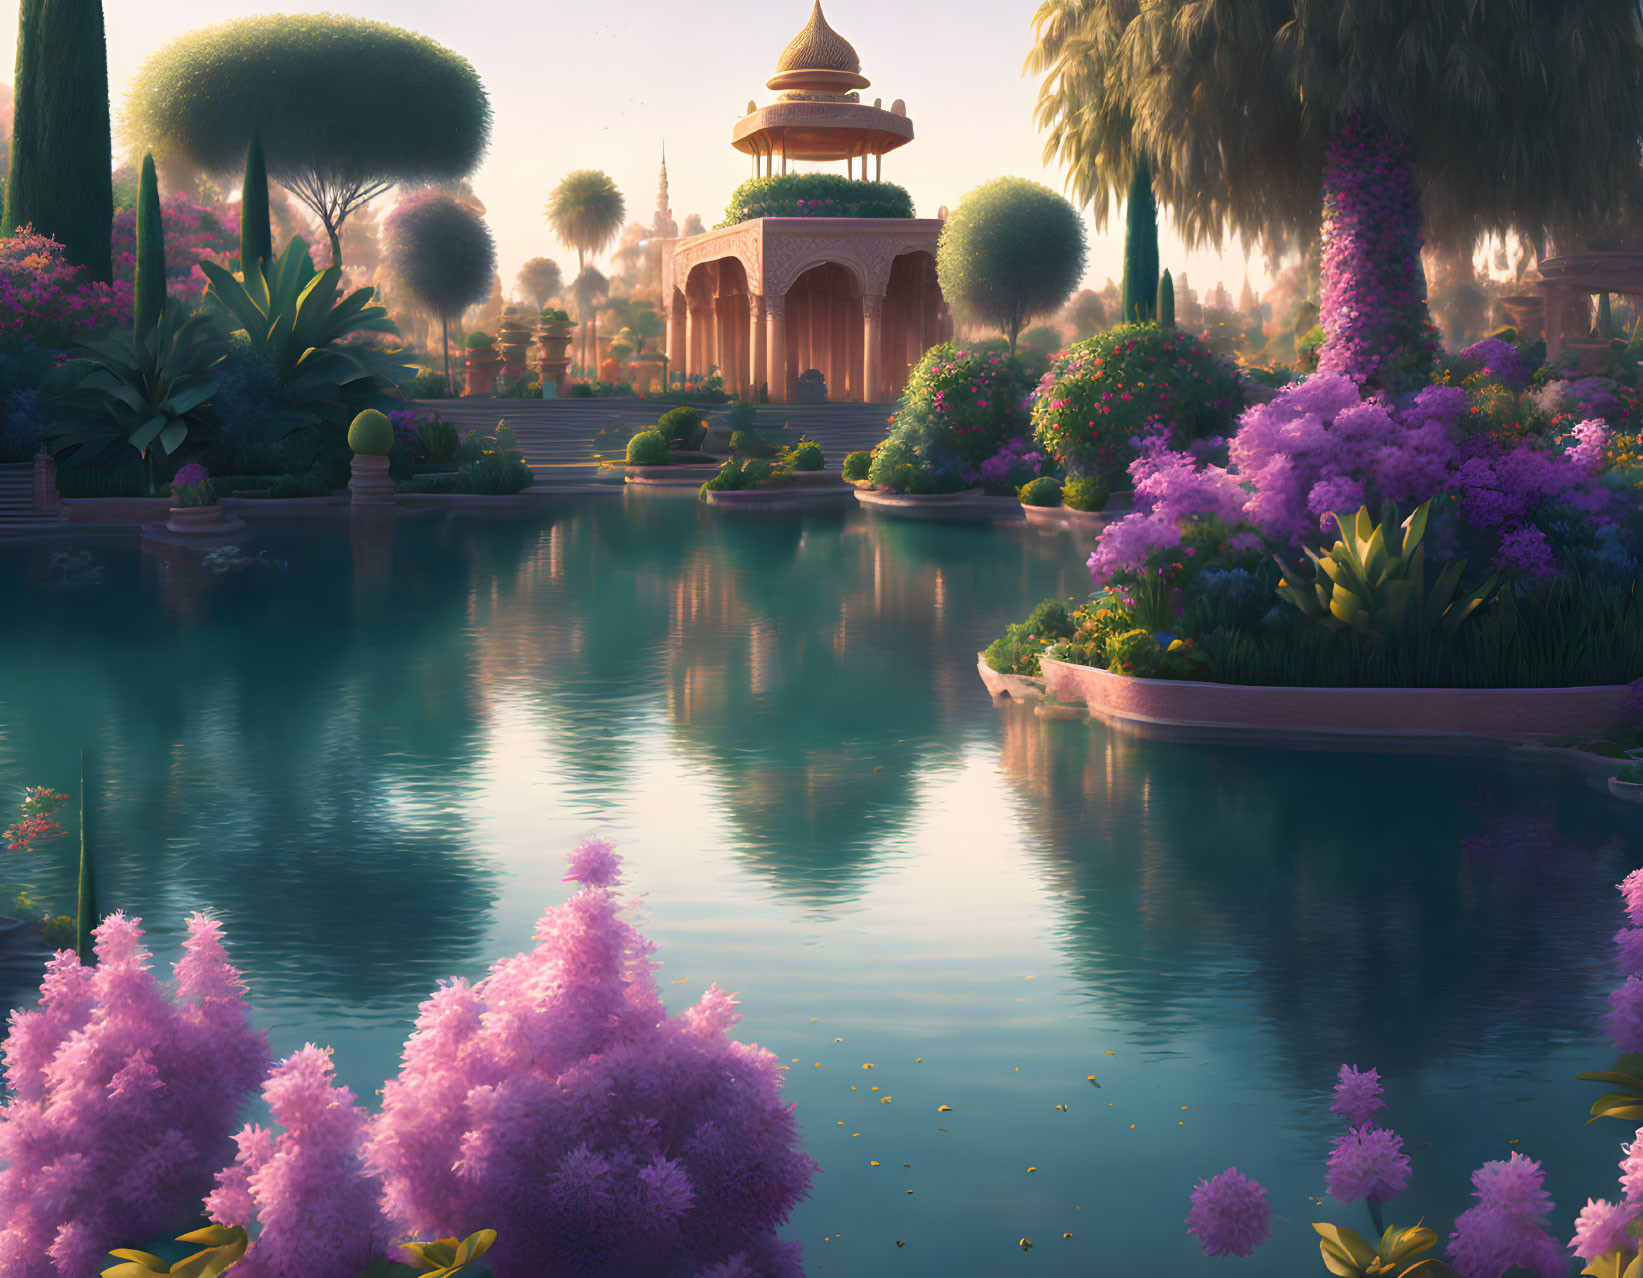 Serene garden with pink florals, pond, greenery, and domed pavilion at dawn